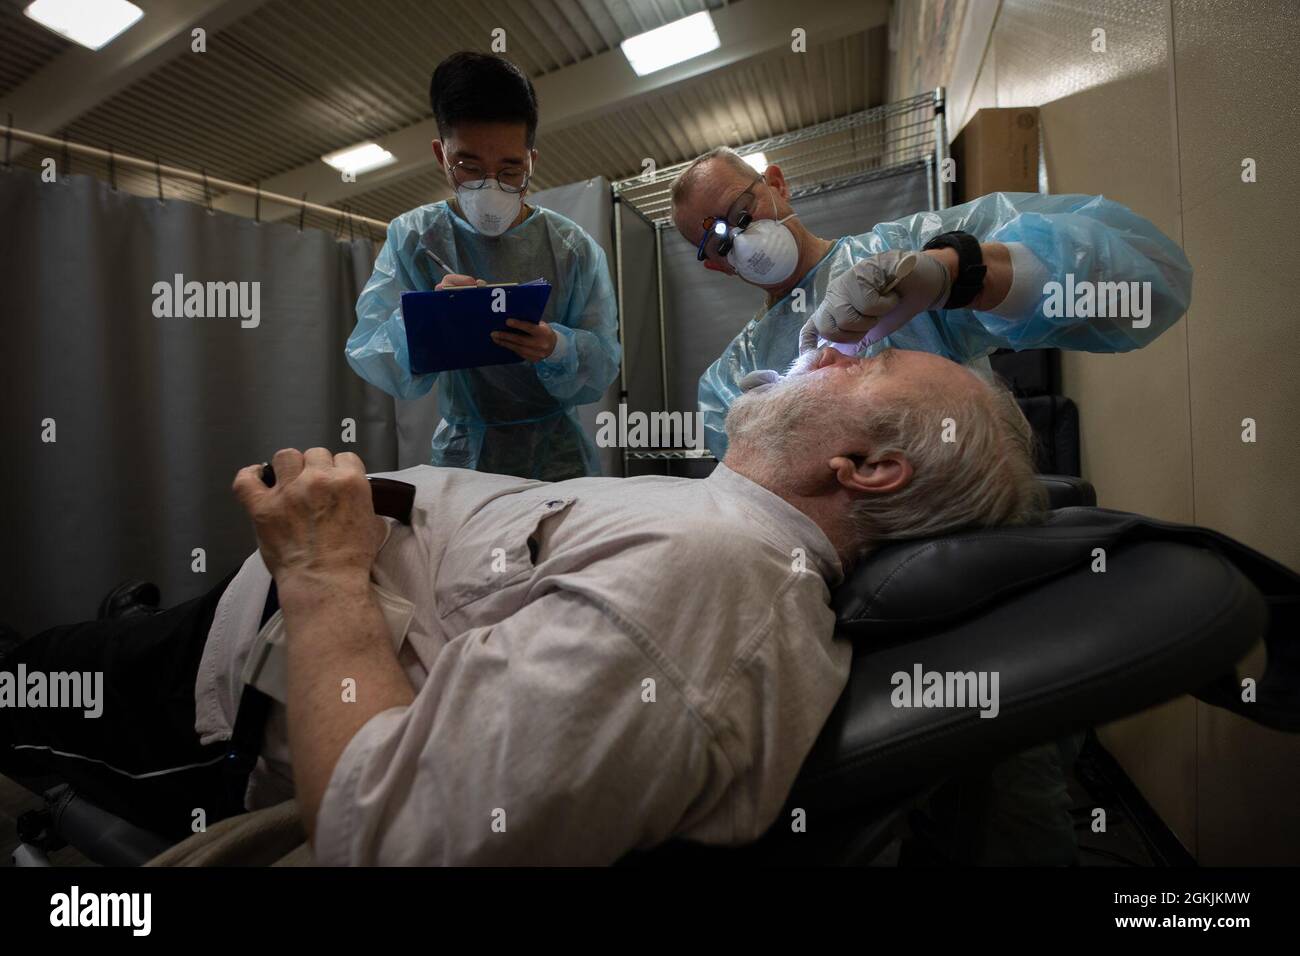 U.S. Air National Guard Major Raymond Martin, 102nd Medical Group, 102nd Intelligence Wing, along with a U.S. Army Soldier, conduct a dental exam for a Kodiak Island resident during Arctic Care 2021 in Kodiak, Alaska, on May 5, 2021. Arctic Care 2021 provides medical troops and support personnel “hands-on” readiness training while providing no-cost medical care to the people of Kodiak, Alaska. Stock Photo